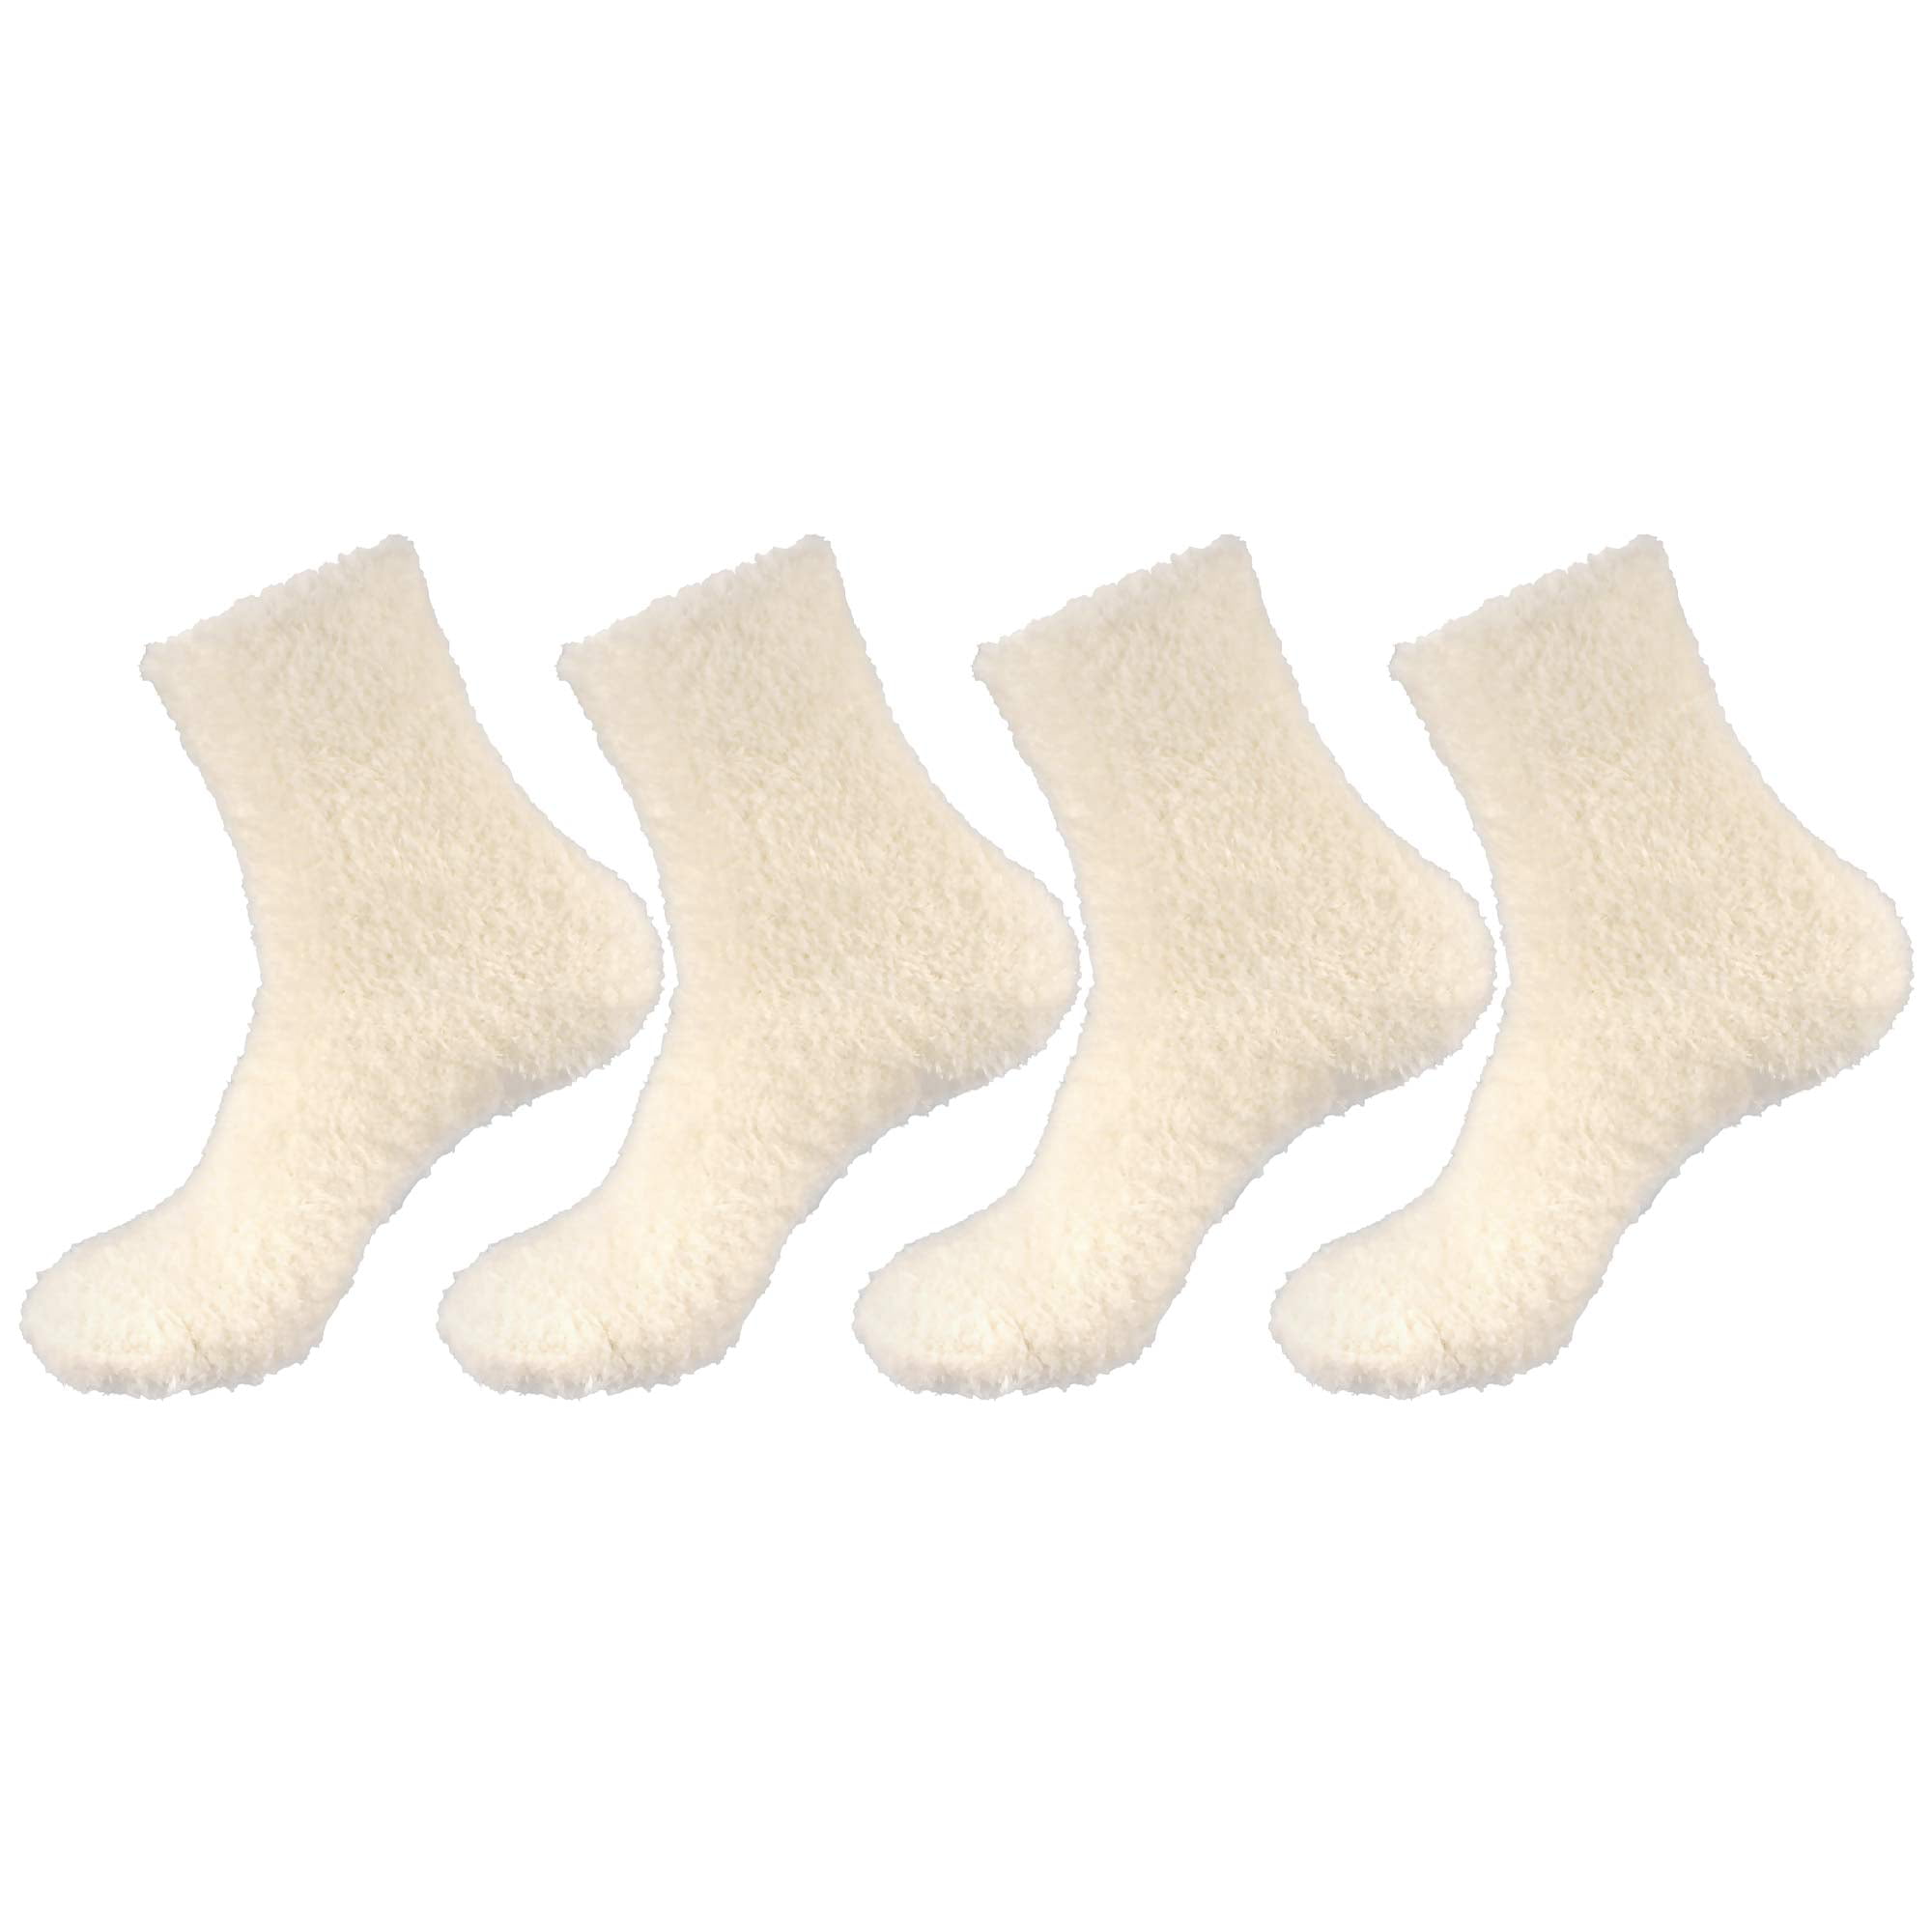 4 Pair Pack New Just One Women's Fuzzy Socks 